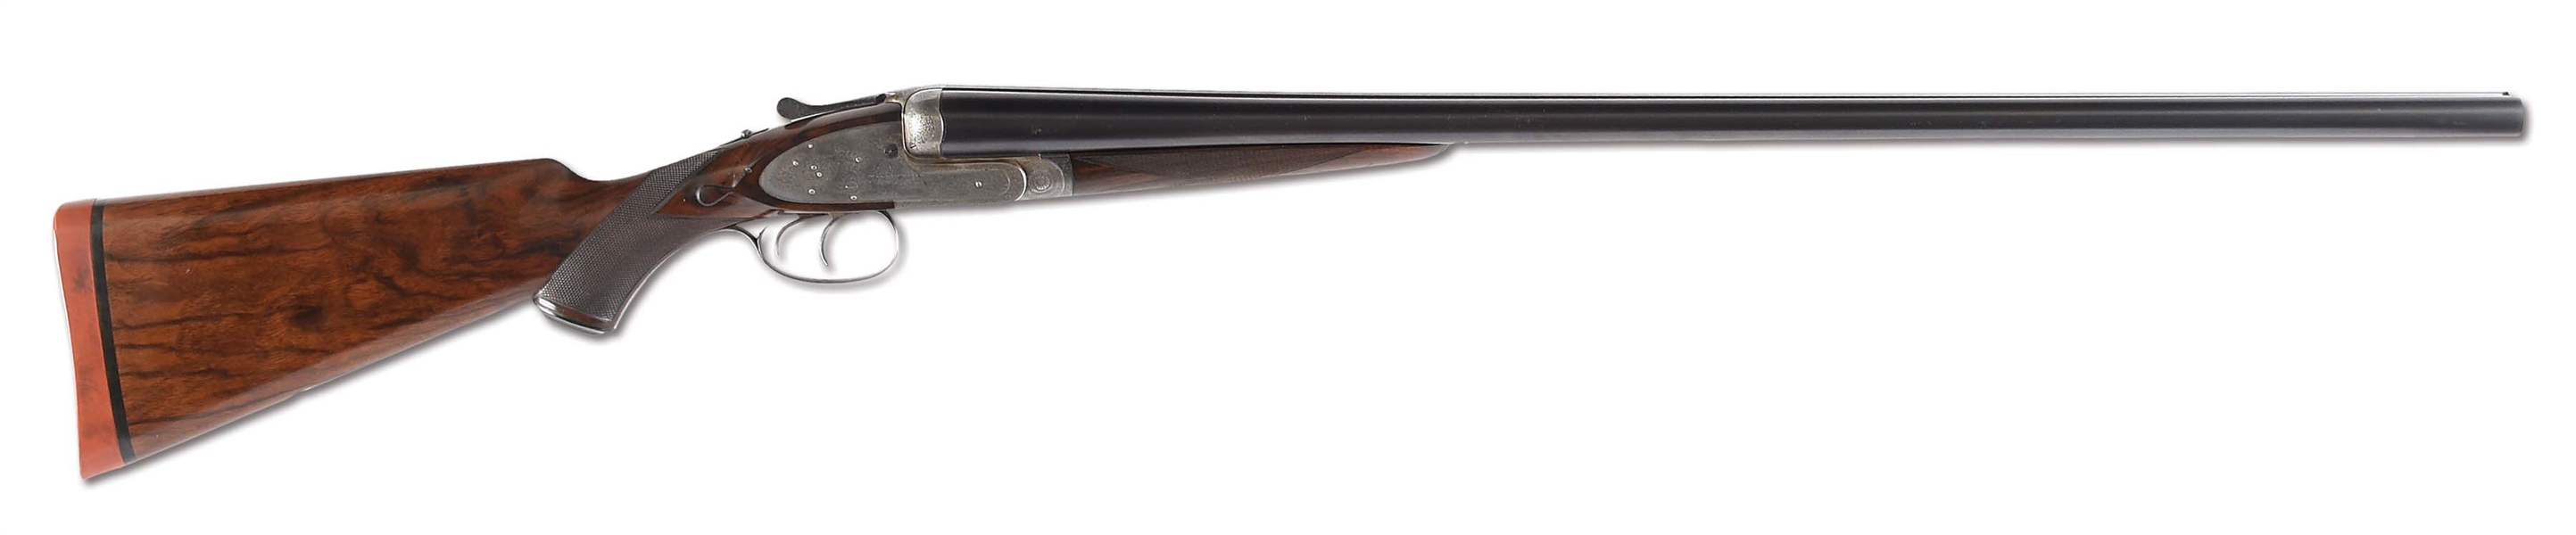 (C) JAMES PURDEY SIDELOCK EJECTOR HEAVY GAME OR PIGEON SHOTGUN WITH HEAVY PROOF 12 GAUGE BARRELS AND EXTRA 10 GAUGE BARRELS WITH CASE